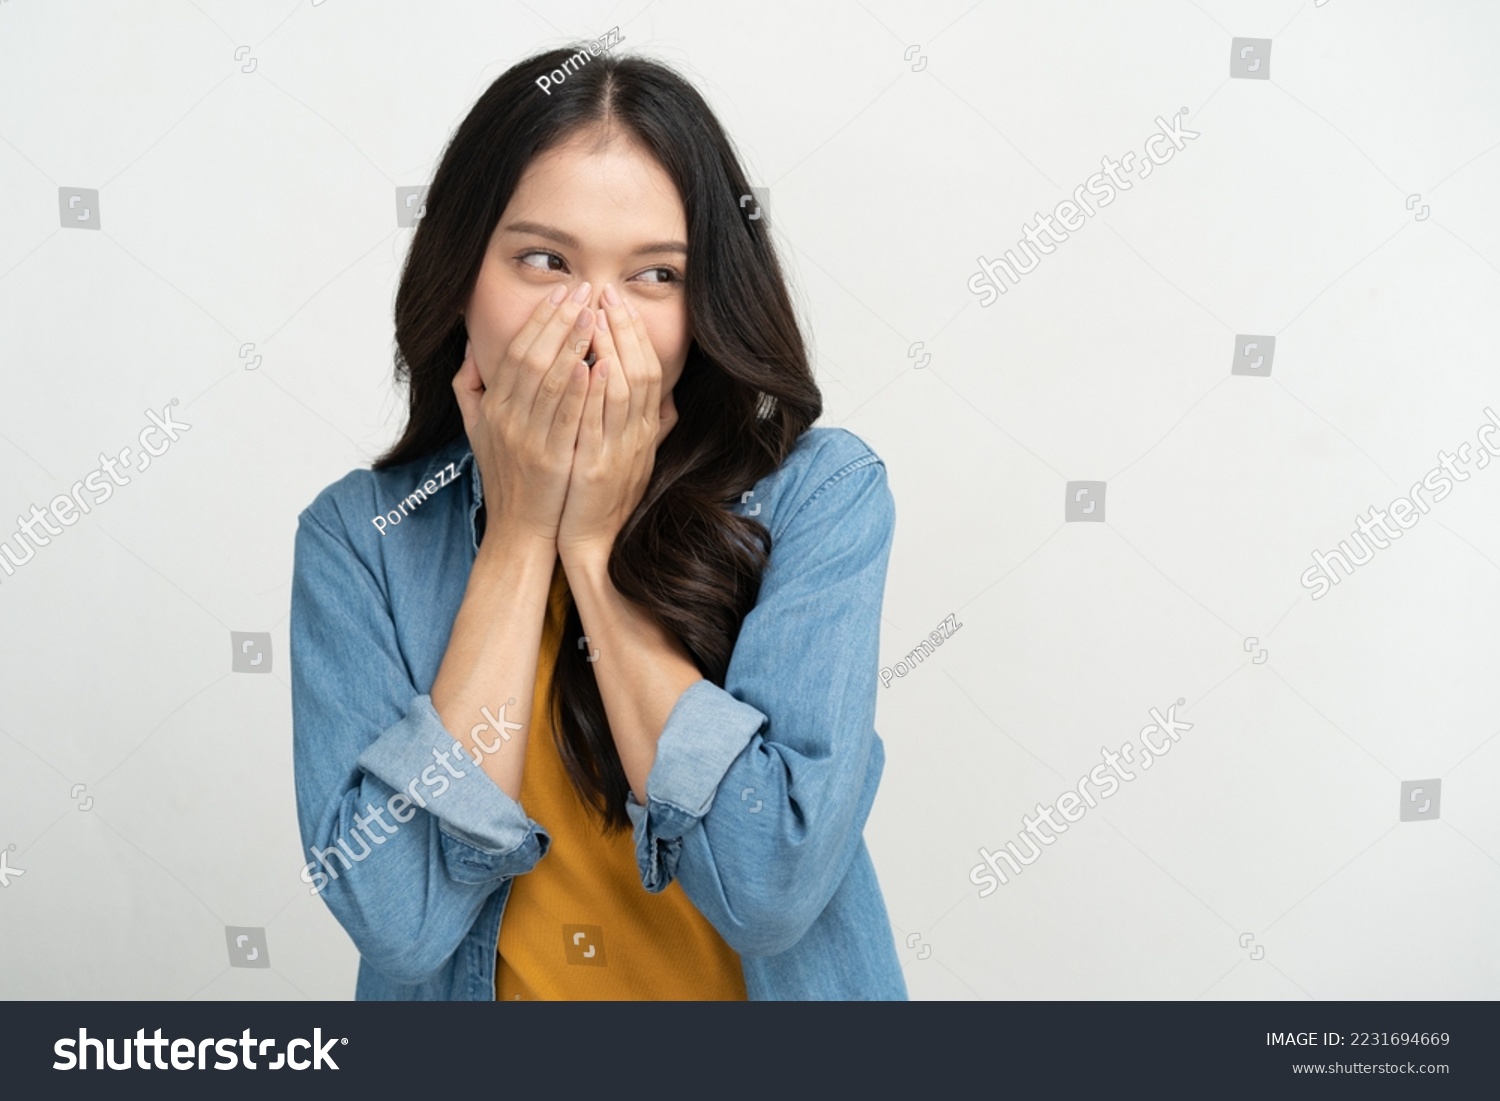 Young woman feeling embarrassed covering her face with her hands #2231694669